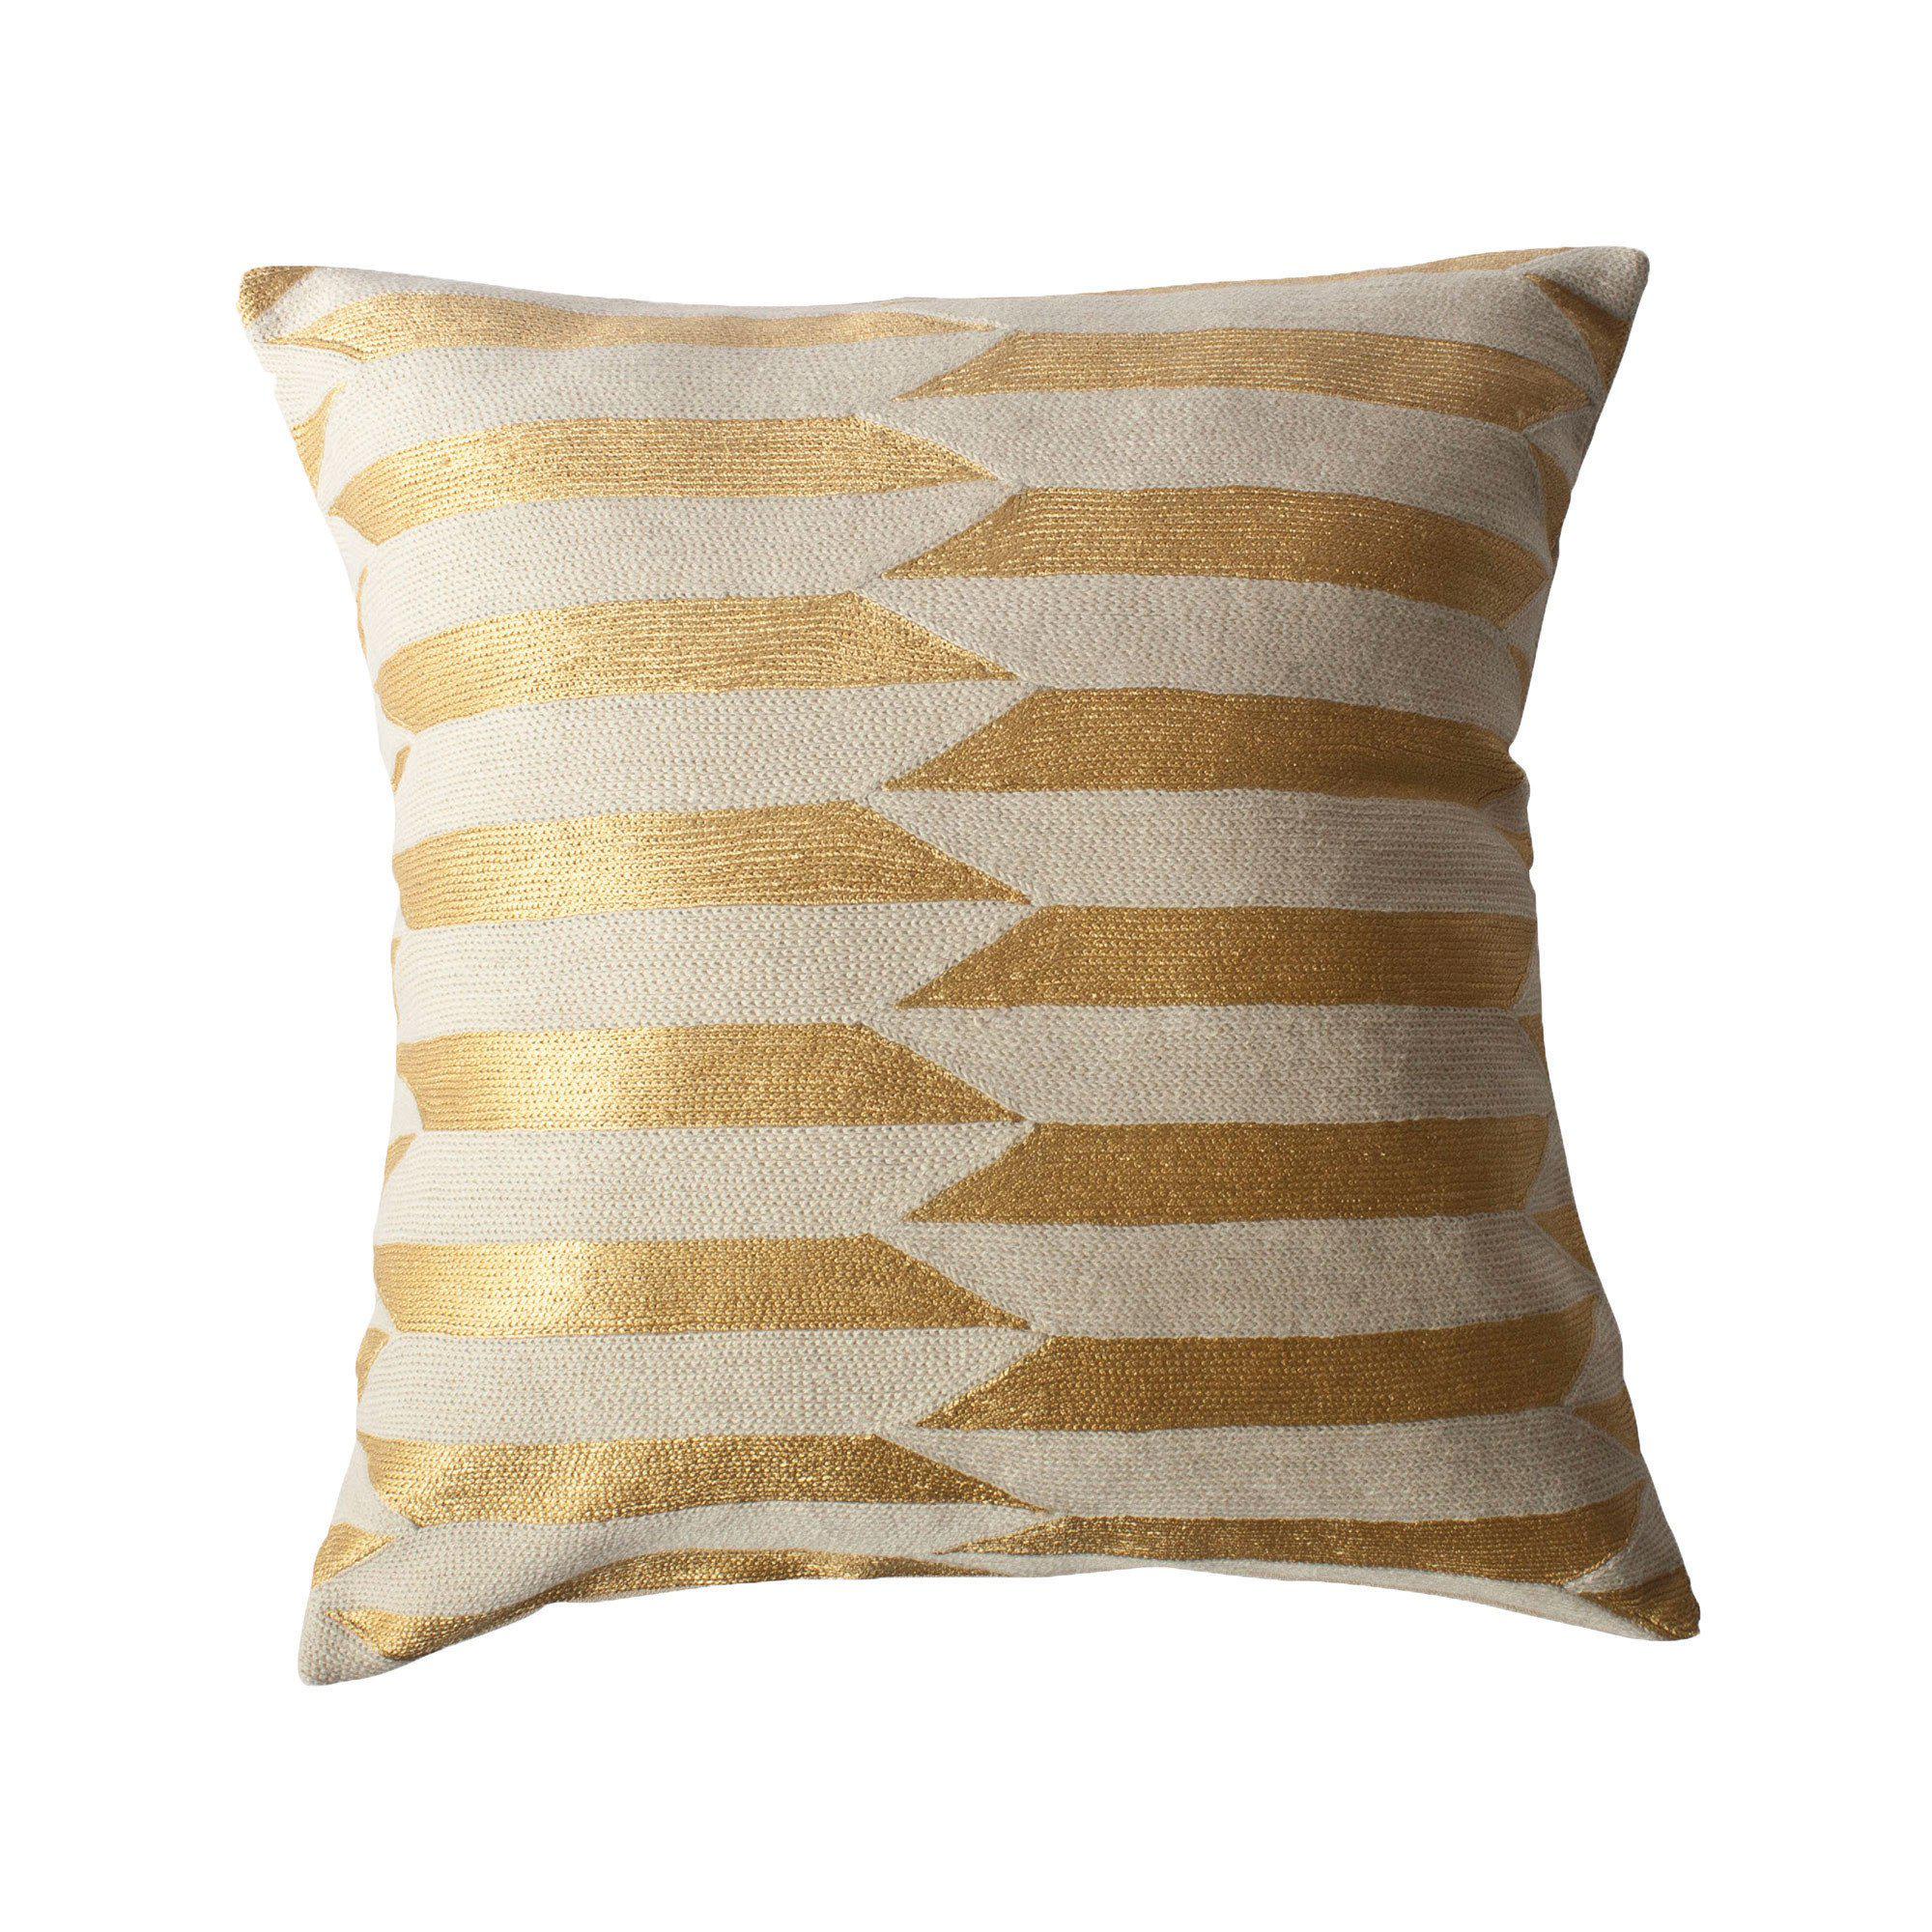 Rugs by Roo | Leah Singh Scarpa Circus Ivory Pillow-H06SCA01